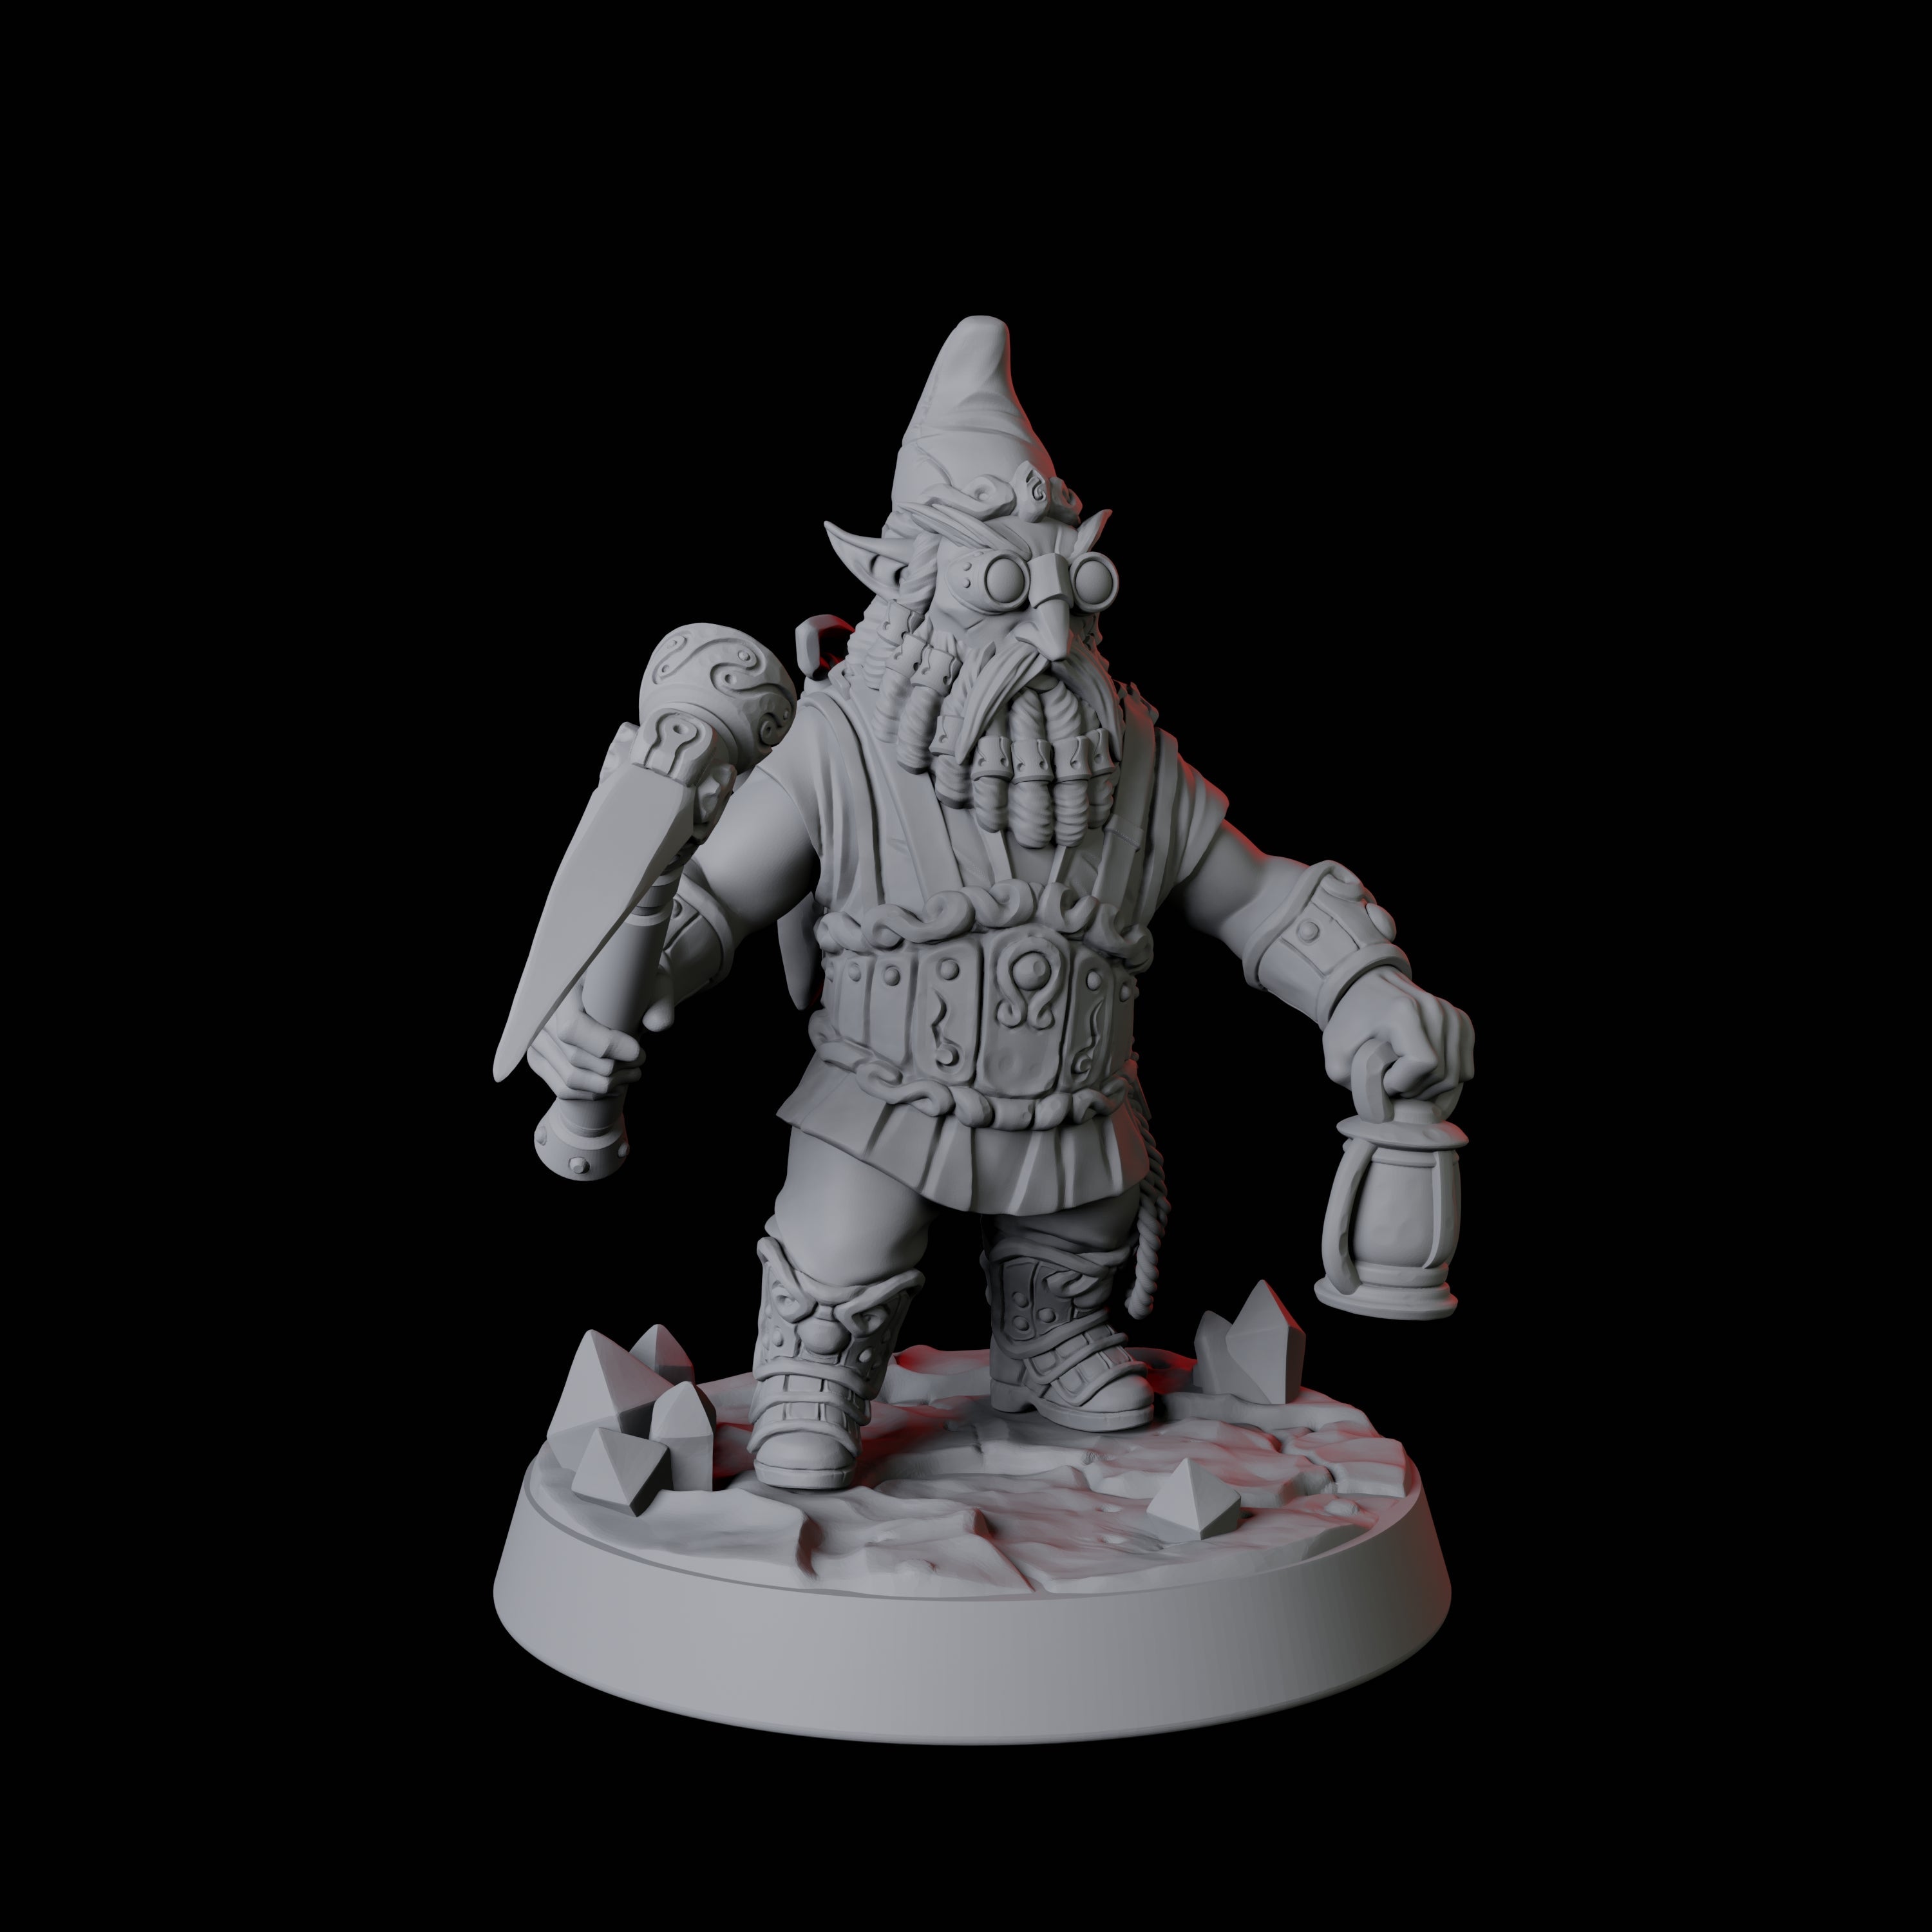 Gnome Miner A Miniature for Dungeons and Dragons, Pathfinder or other TTRPGs